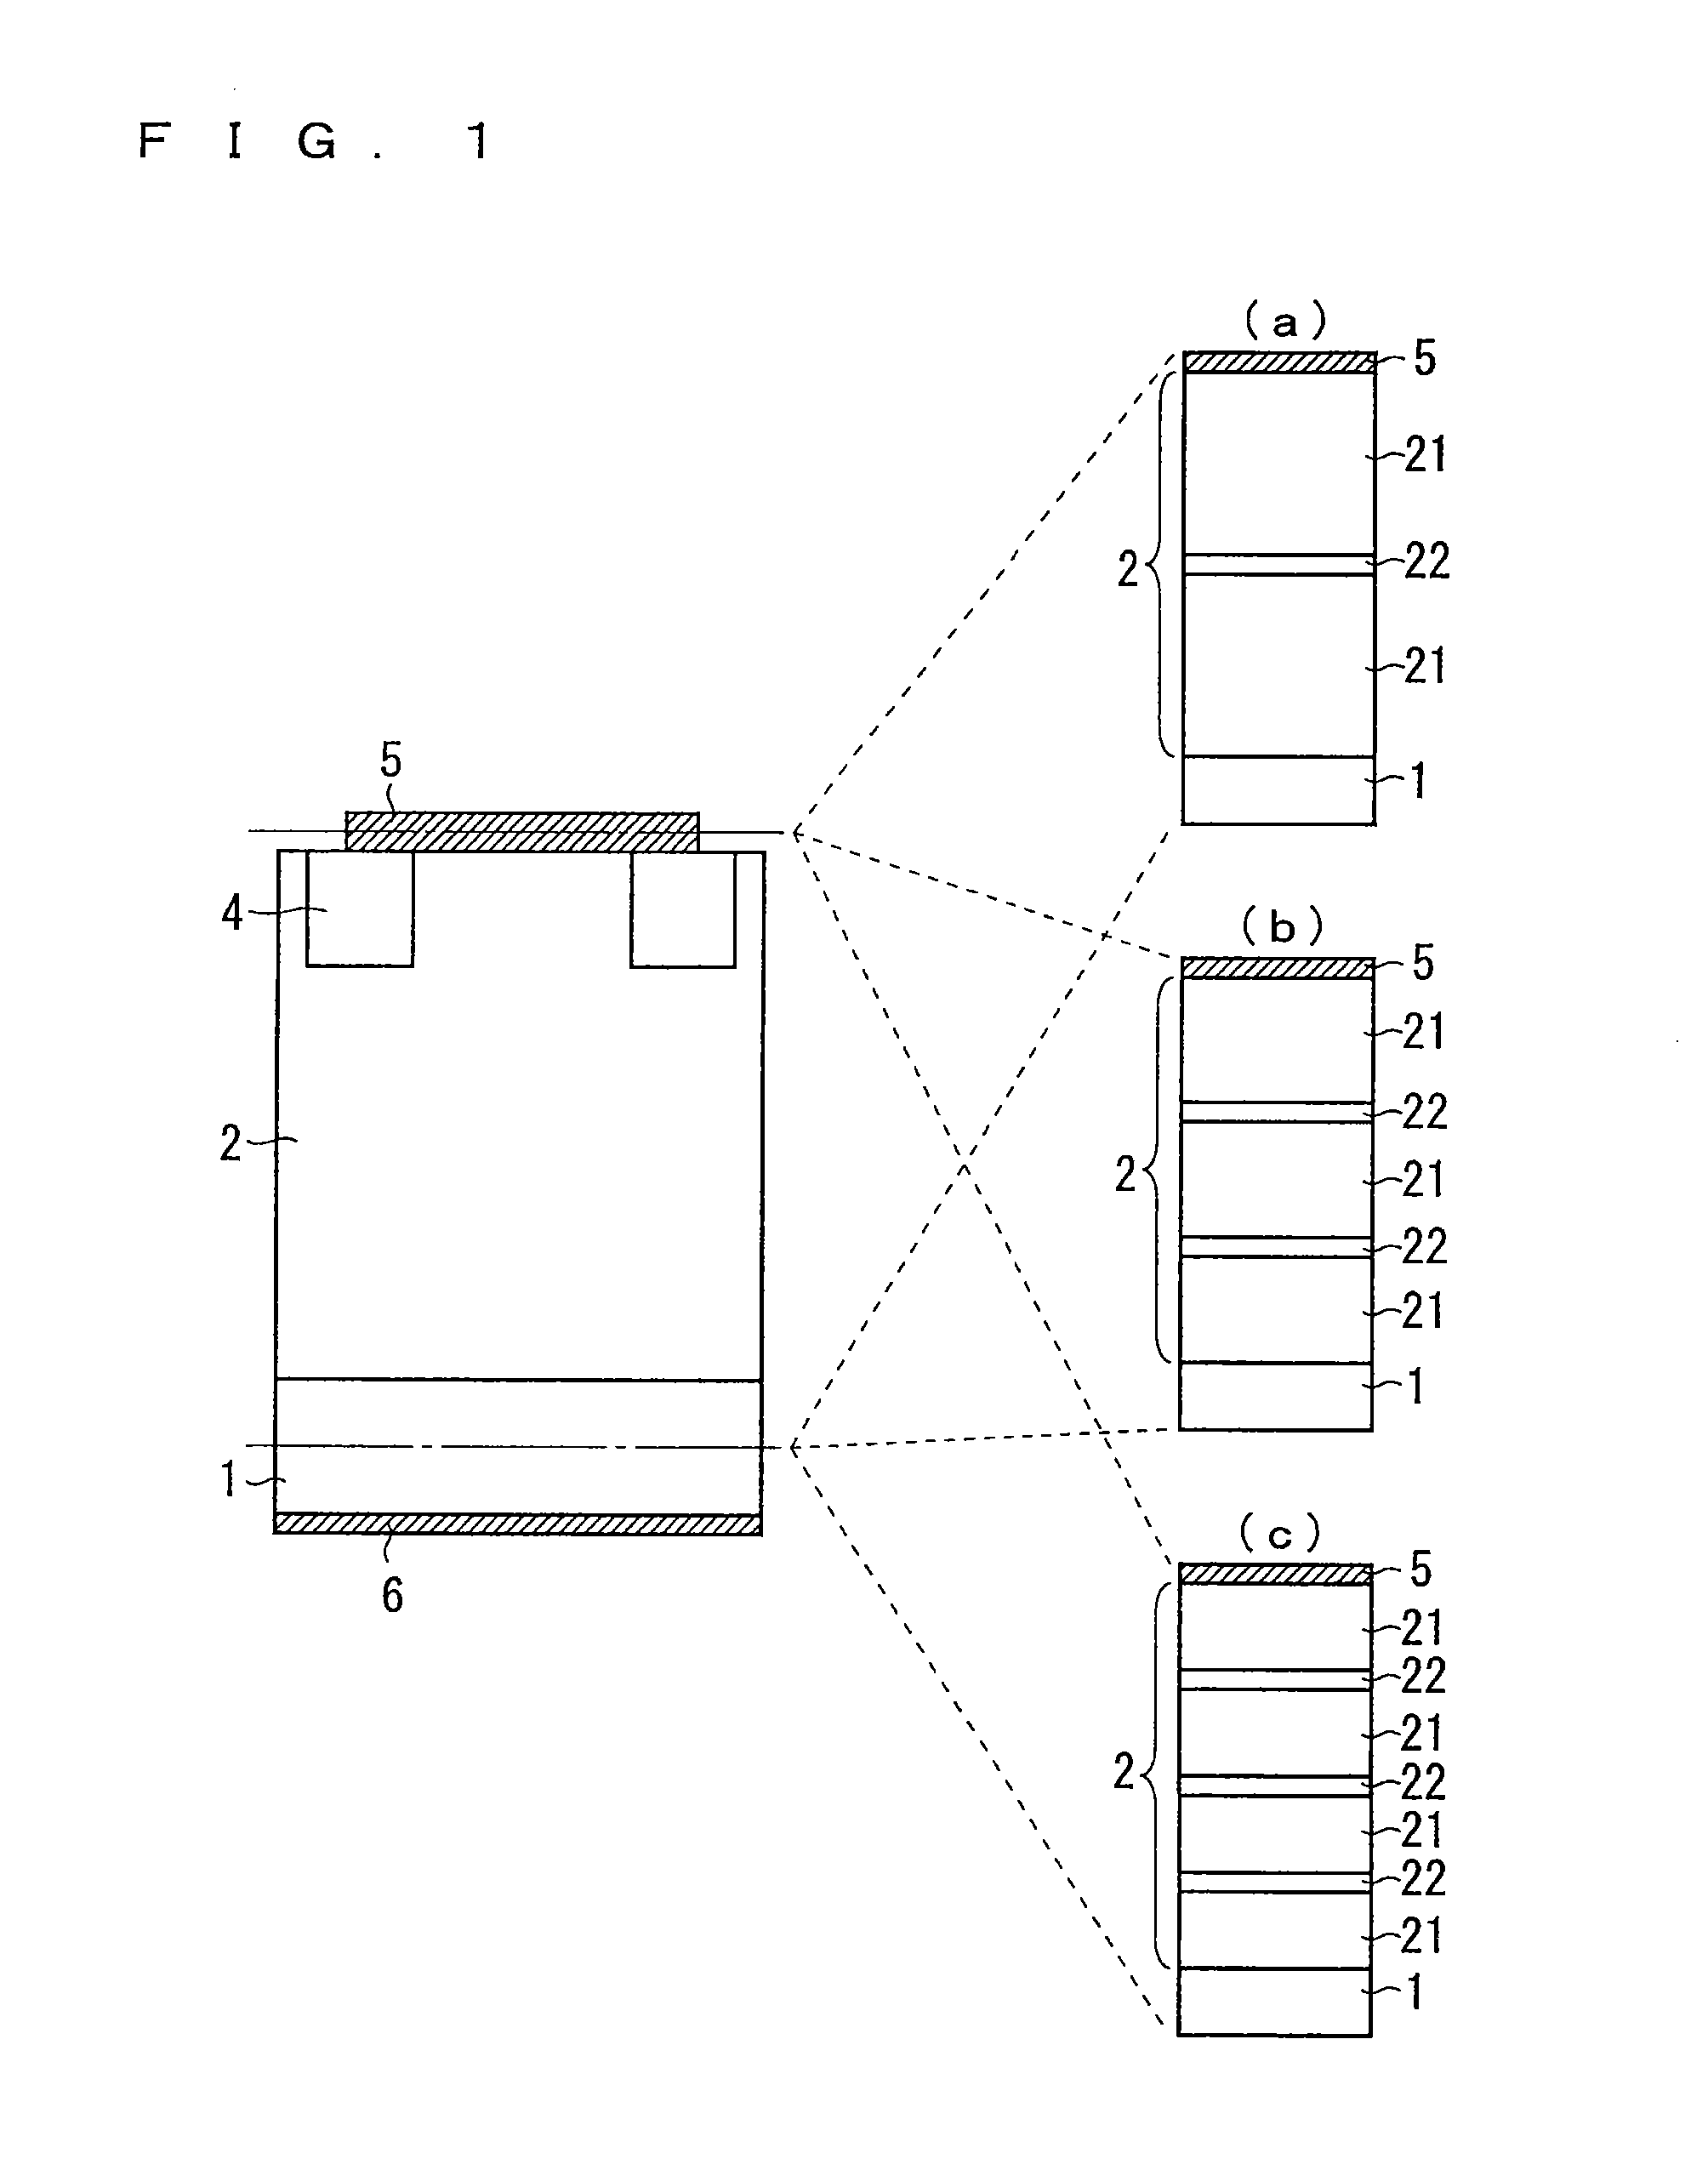 Silicon carbide epitaxial wafer and semiconductor device